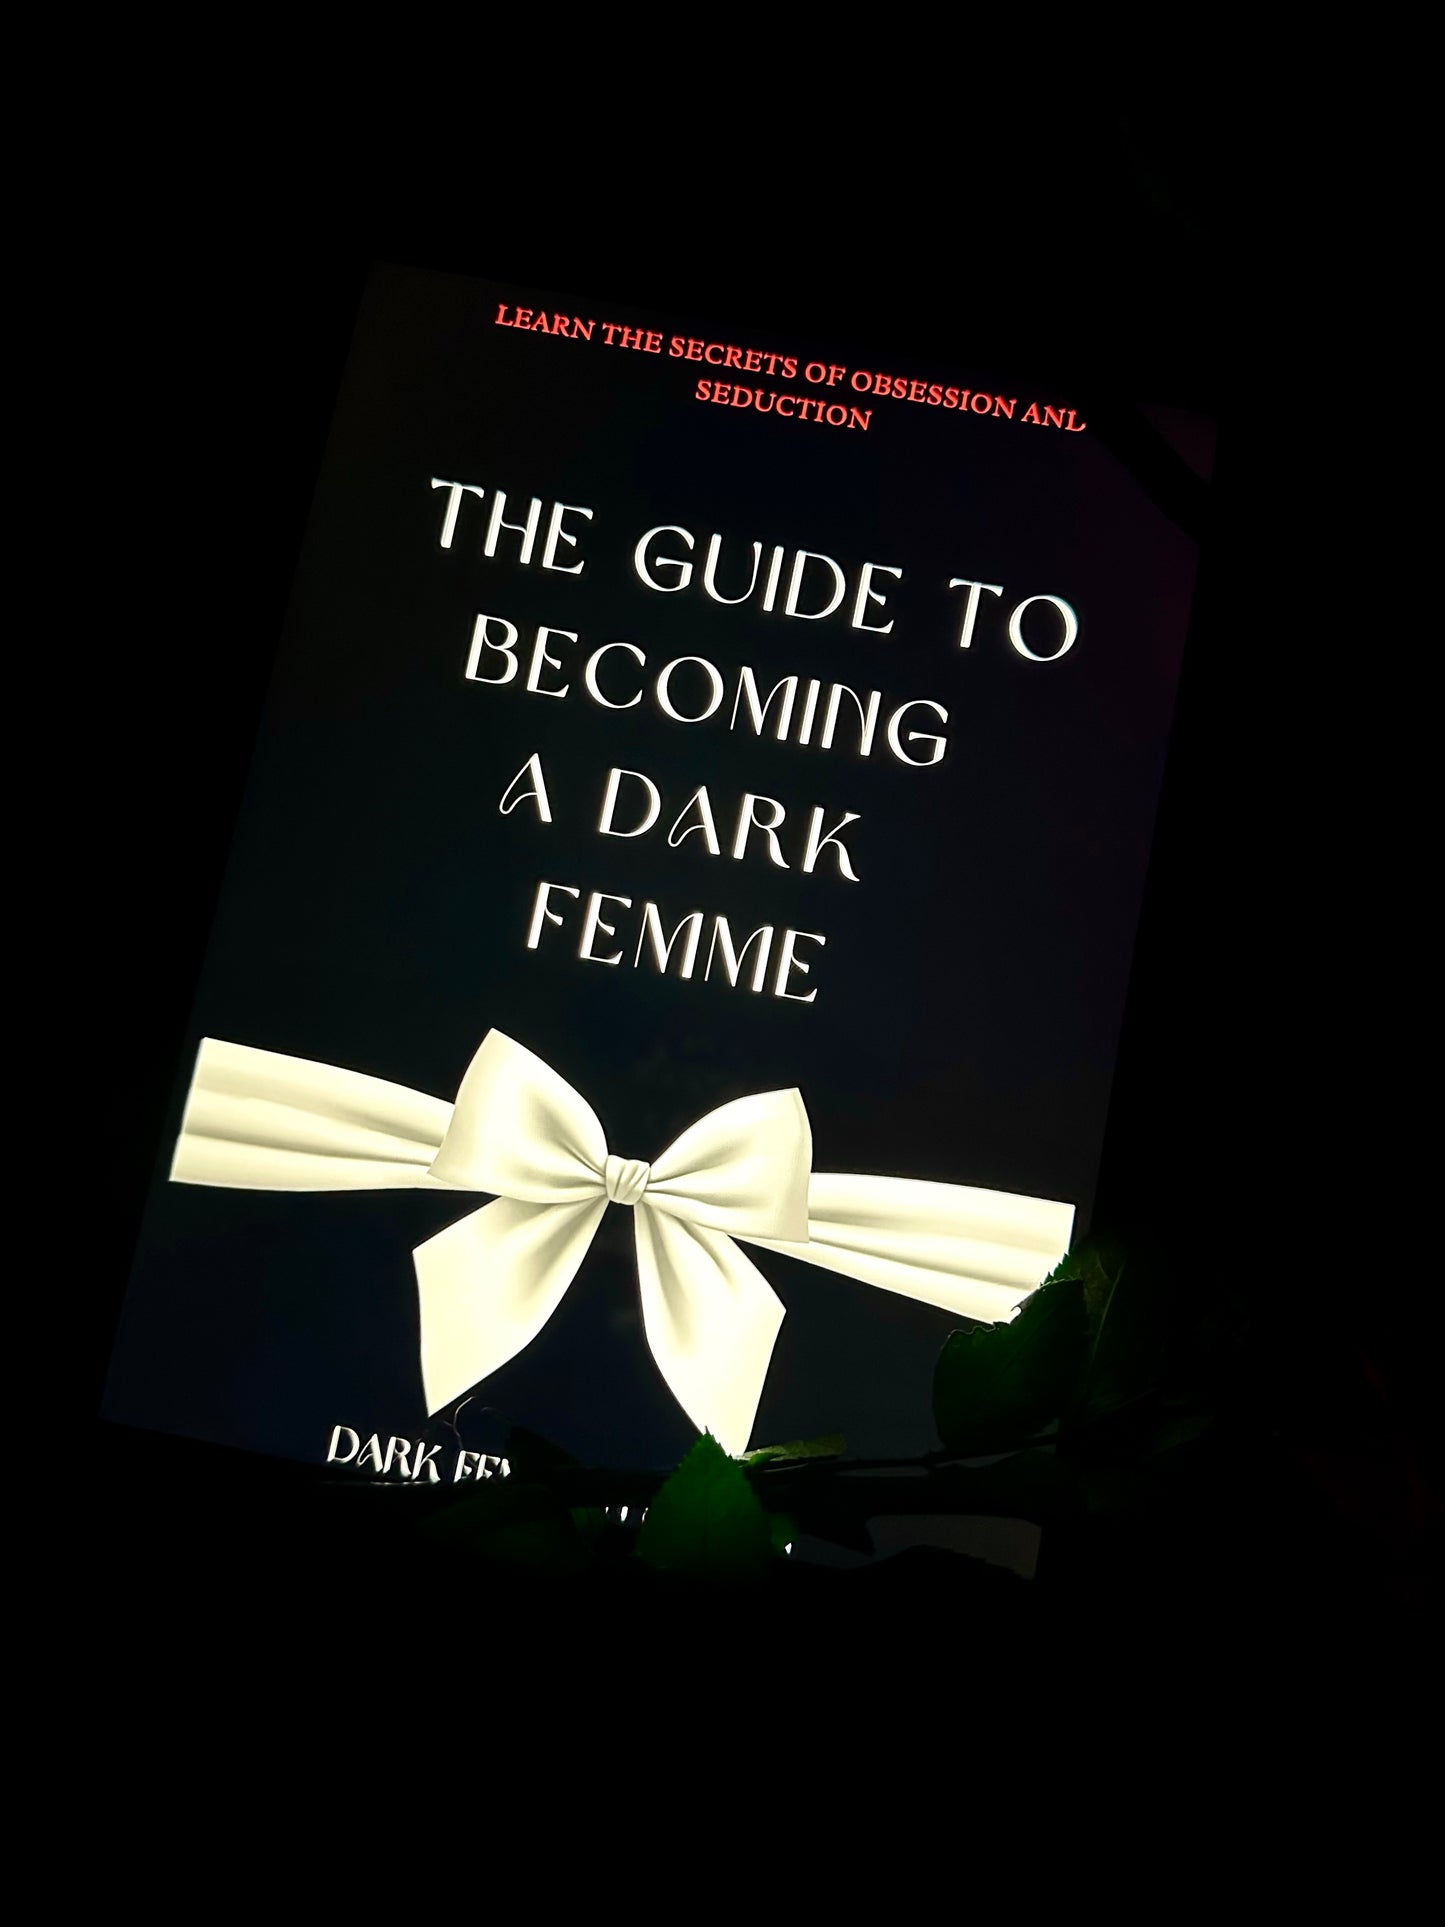 Becoming a Dark Femme: The Deluxe Seduction and Obsession Guide